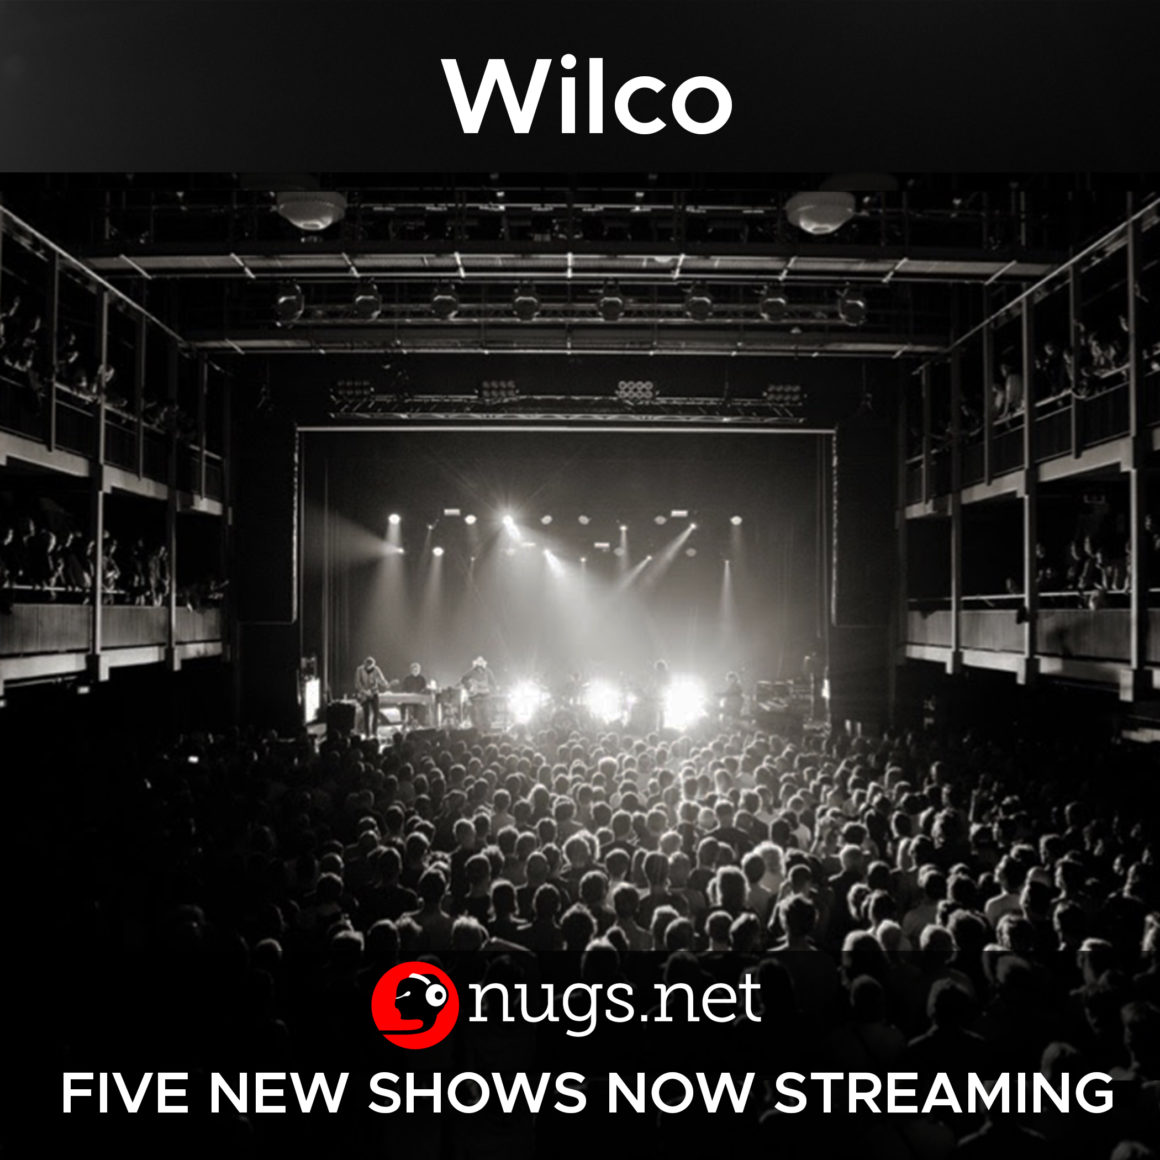 Five Exclusive Archival Shows Added to the Wilco catalog on nugs.net